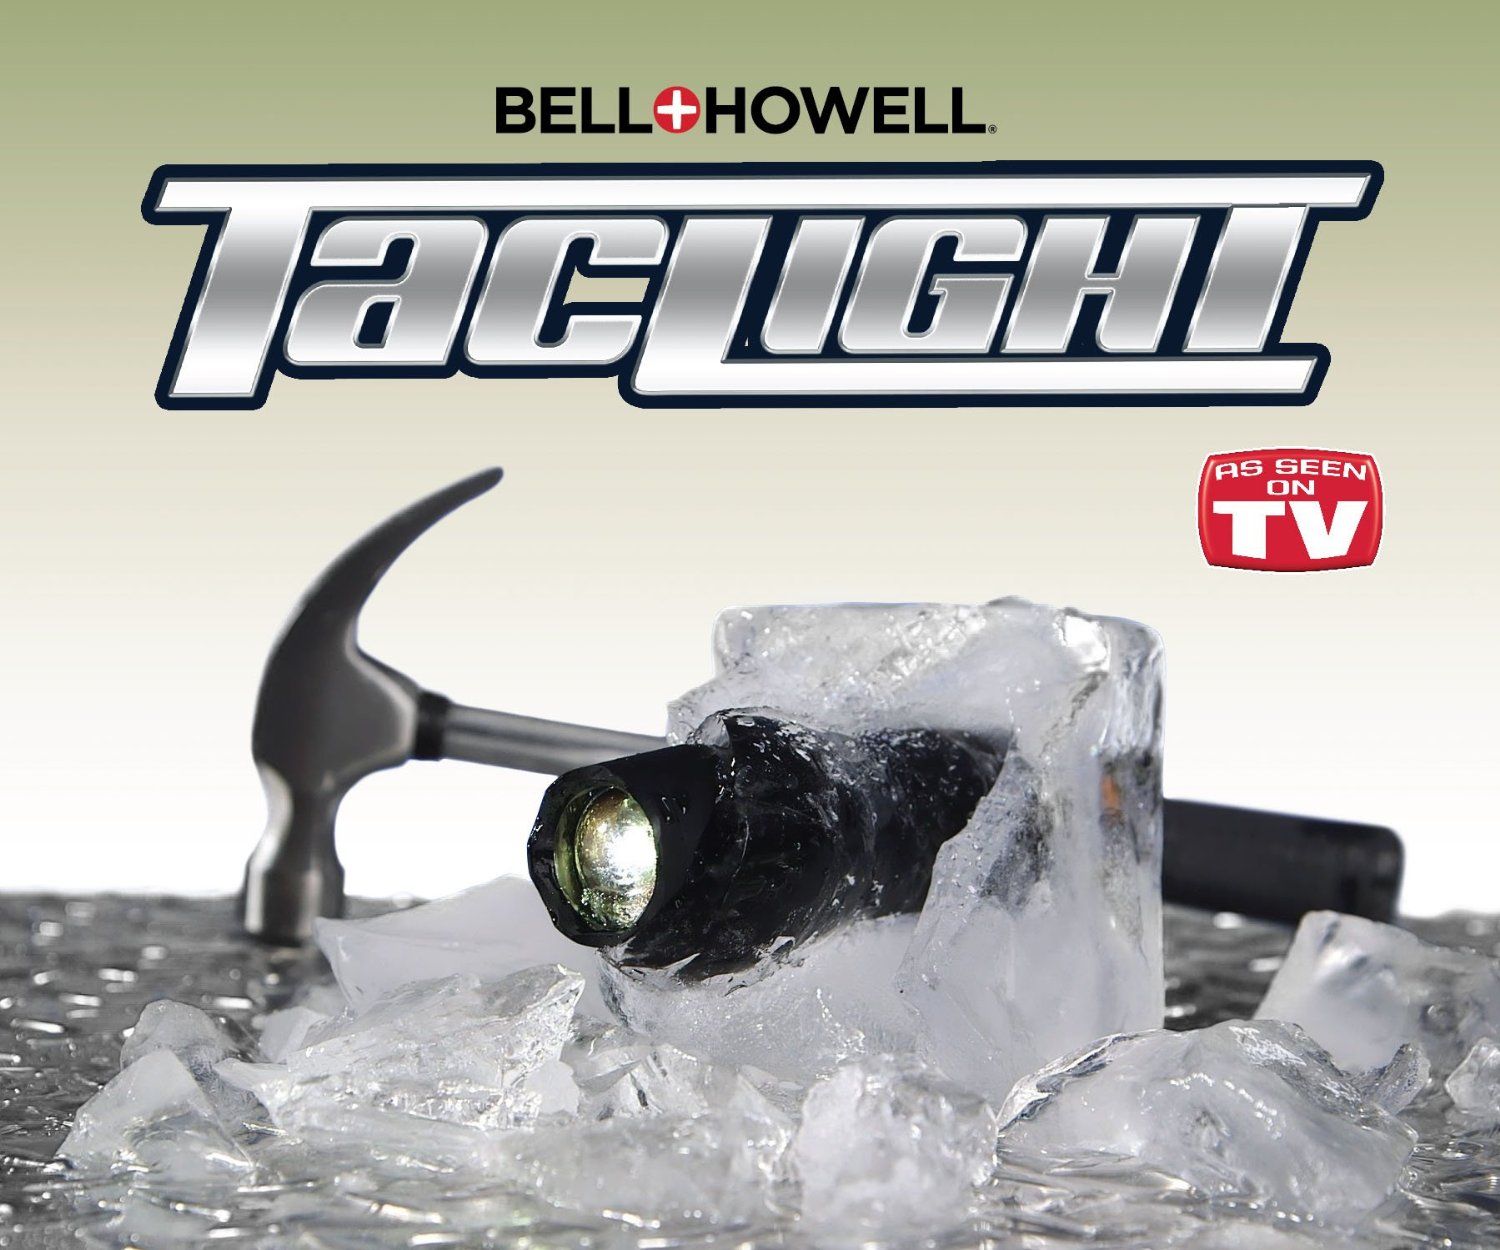 Taclight Tac Flashlight with 5 Modes Zoom 40X Brighter High Lumens Weather Proof Flashlight As Seen on TV - image 5 of 10